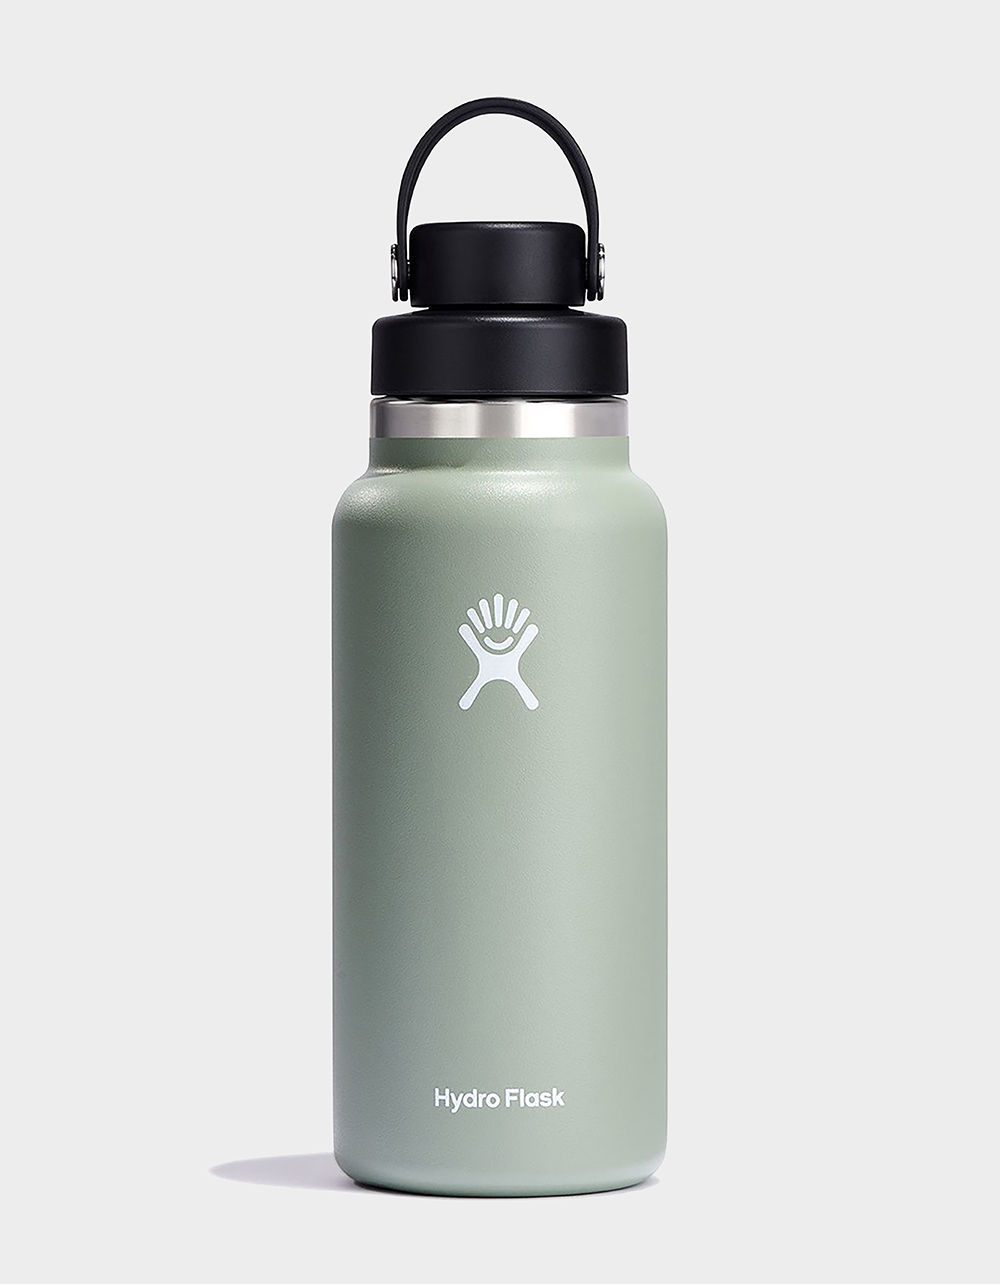 Agave has arrived. - Hydro Flask